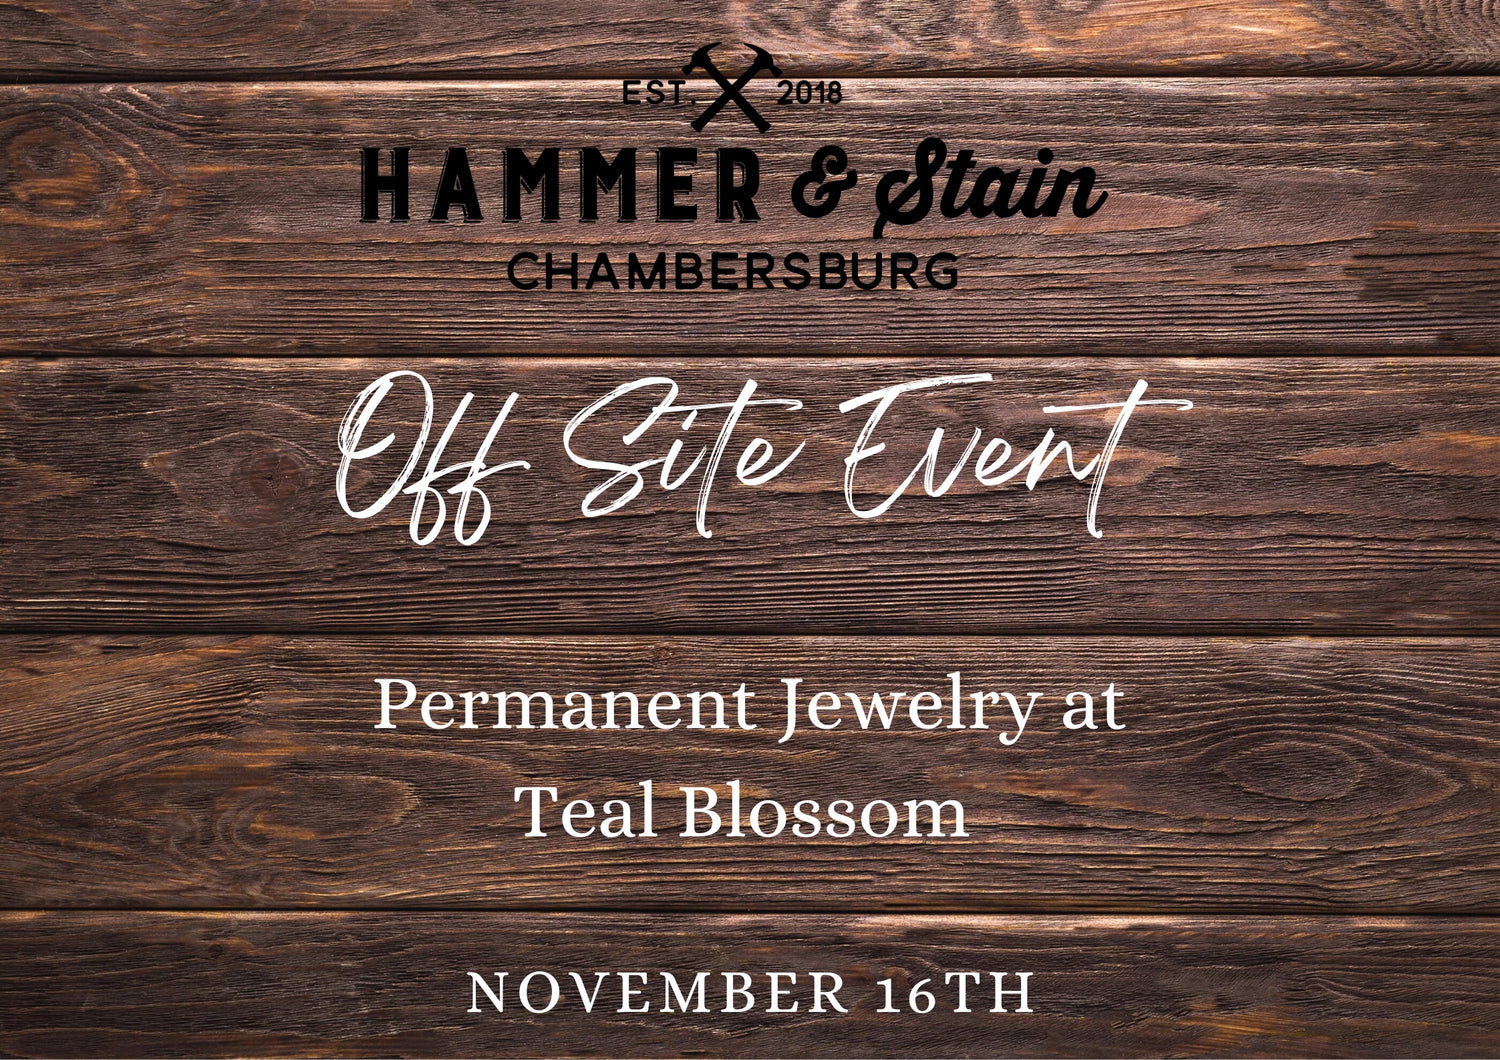 09/30/23 Teal Blossom Boutique Permanent Jewelry event 10am